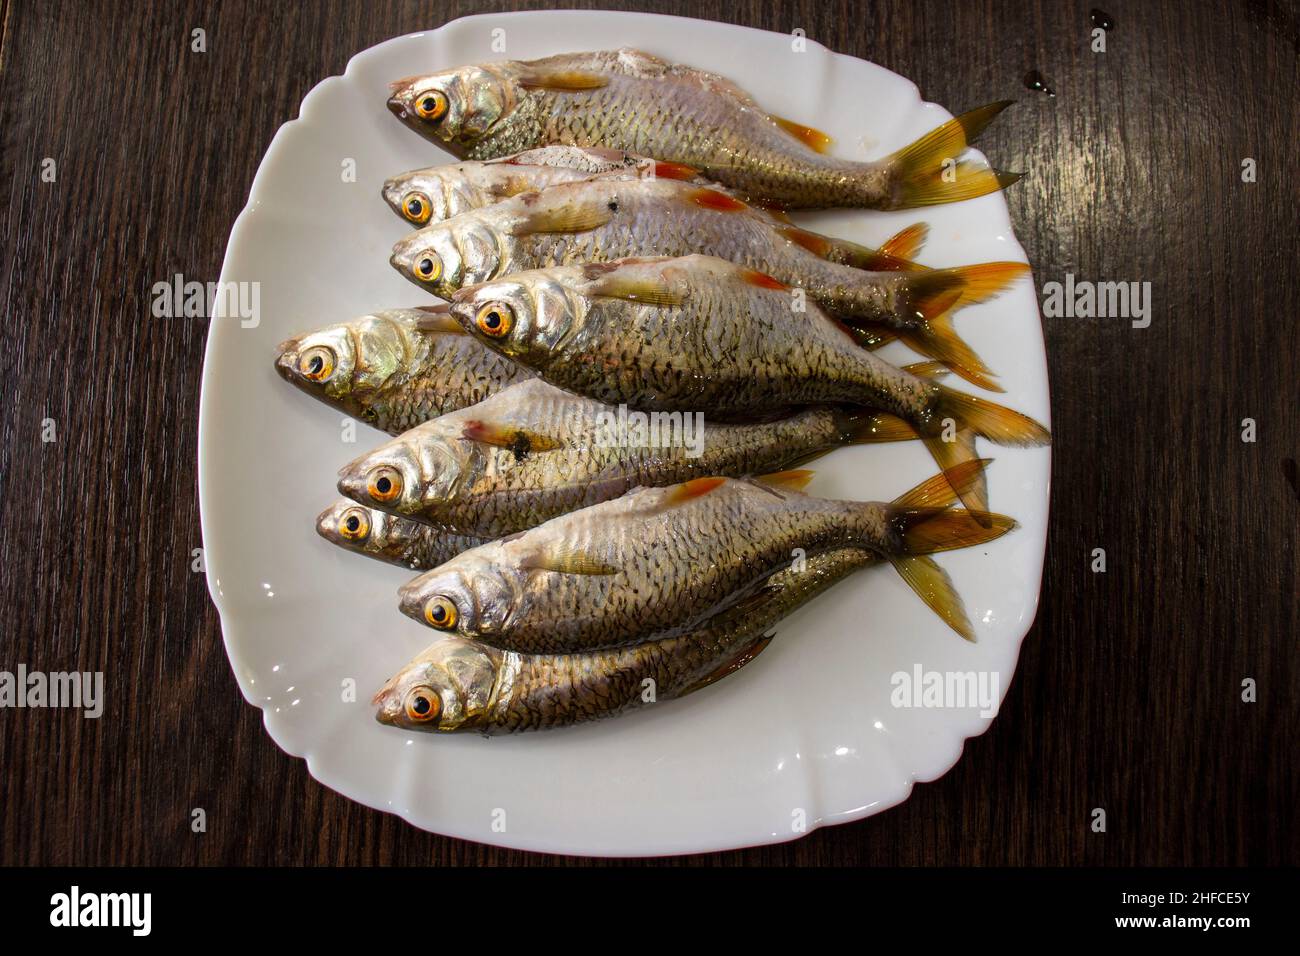 Peeled fish on a plate. Stock Photo